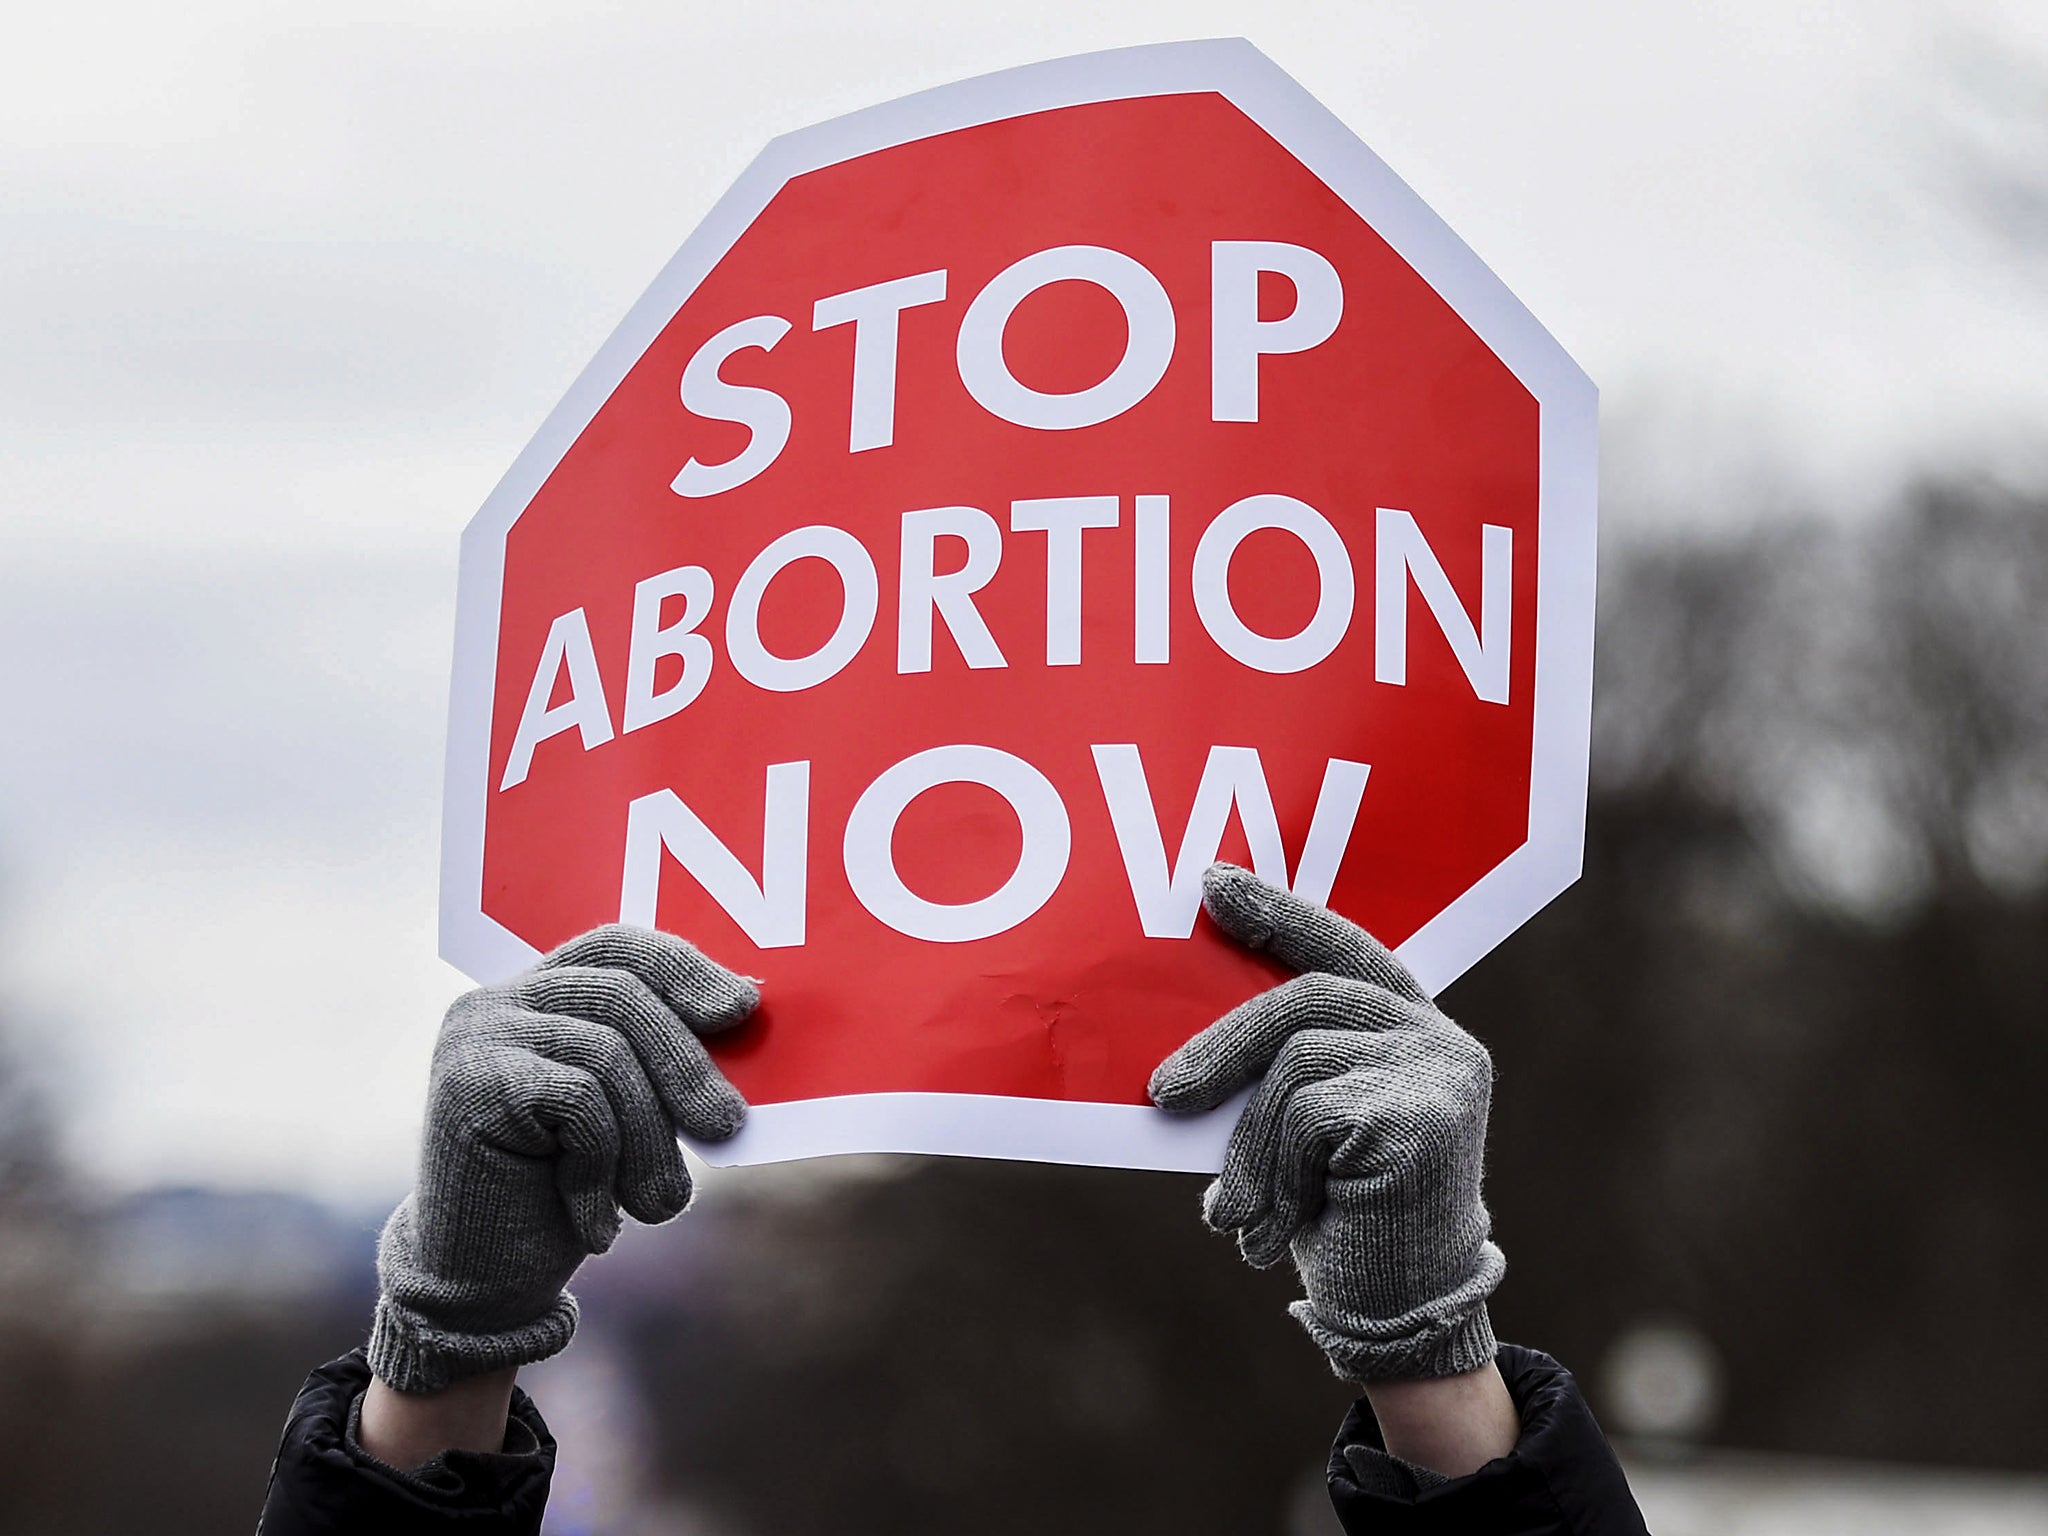 Protestor holds a sign during the March for Life